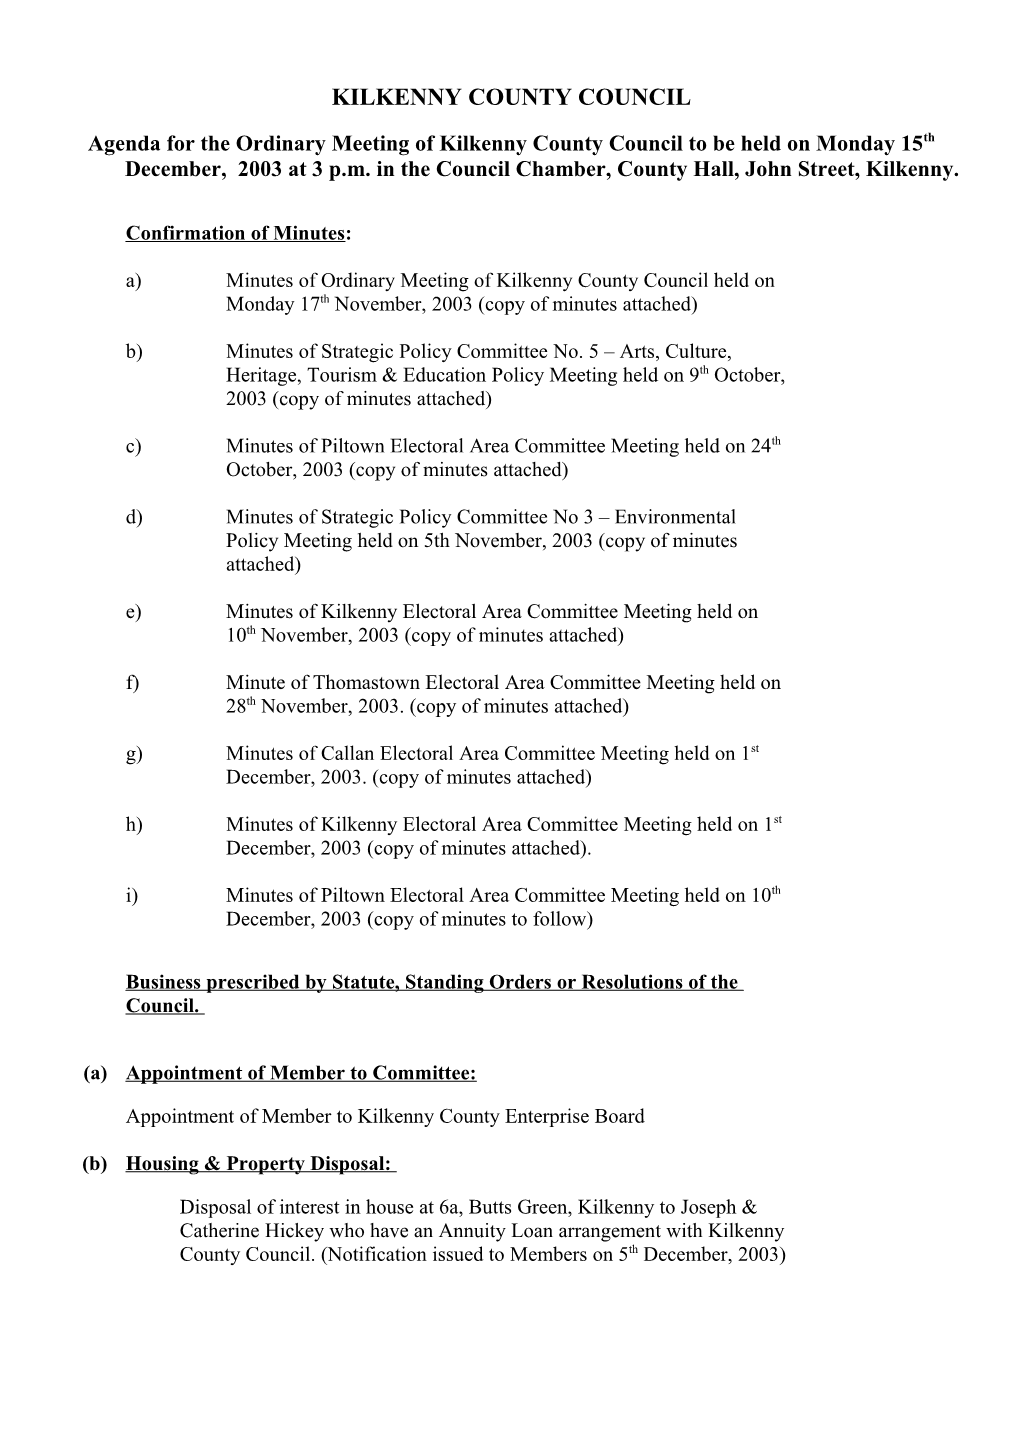 Agenda for Ordinary Meeting of Kilkenny County Council to Be Held on 15Th December, 2003